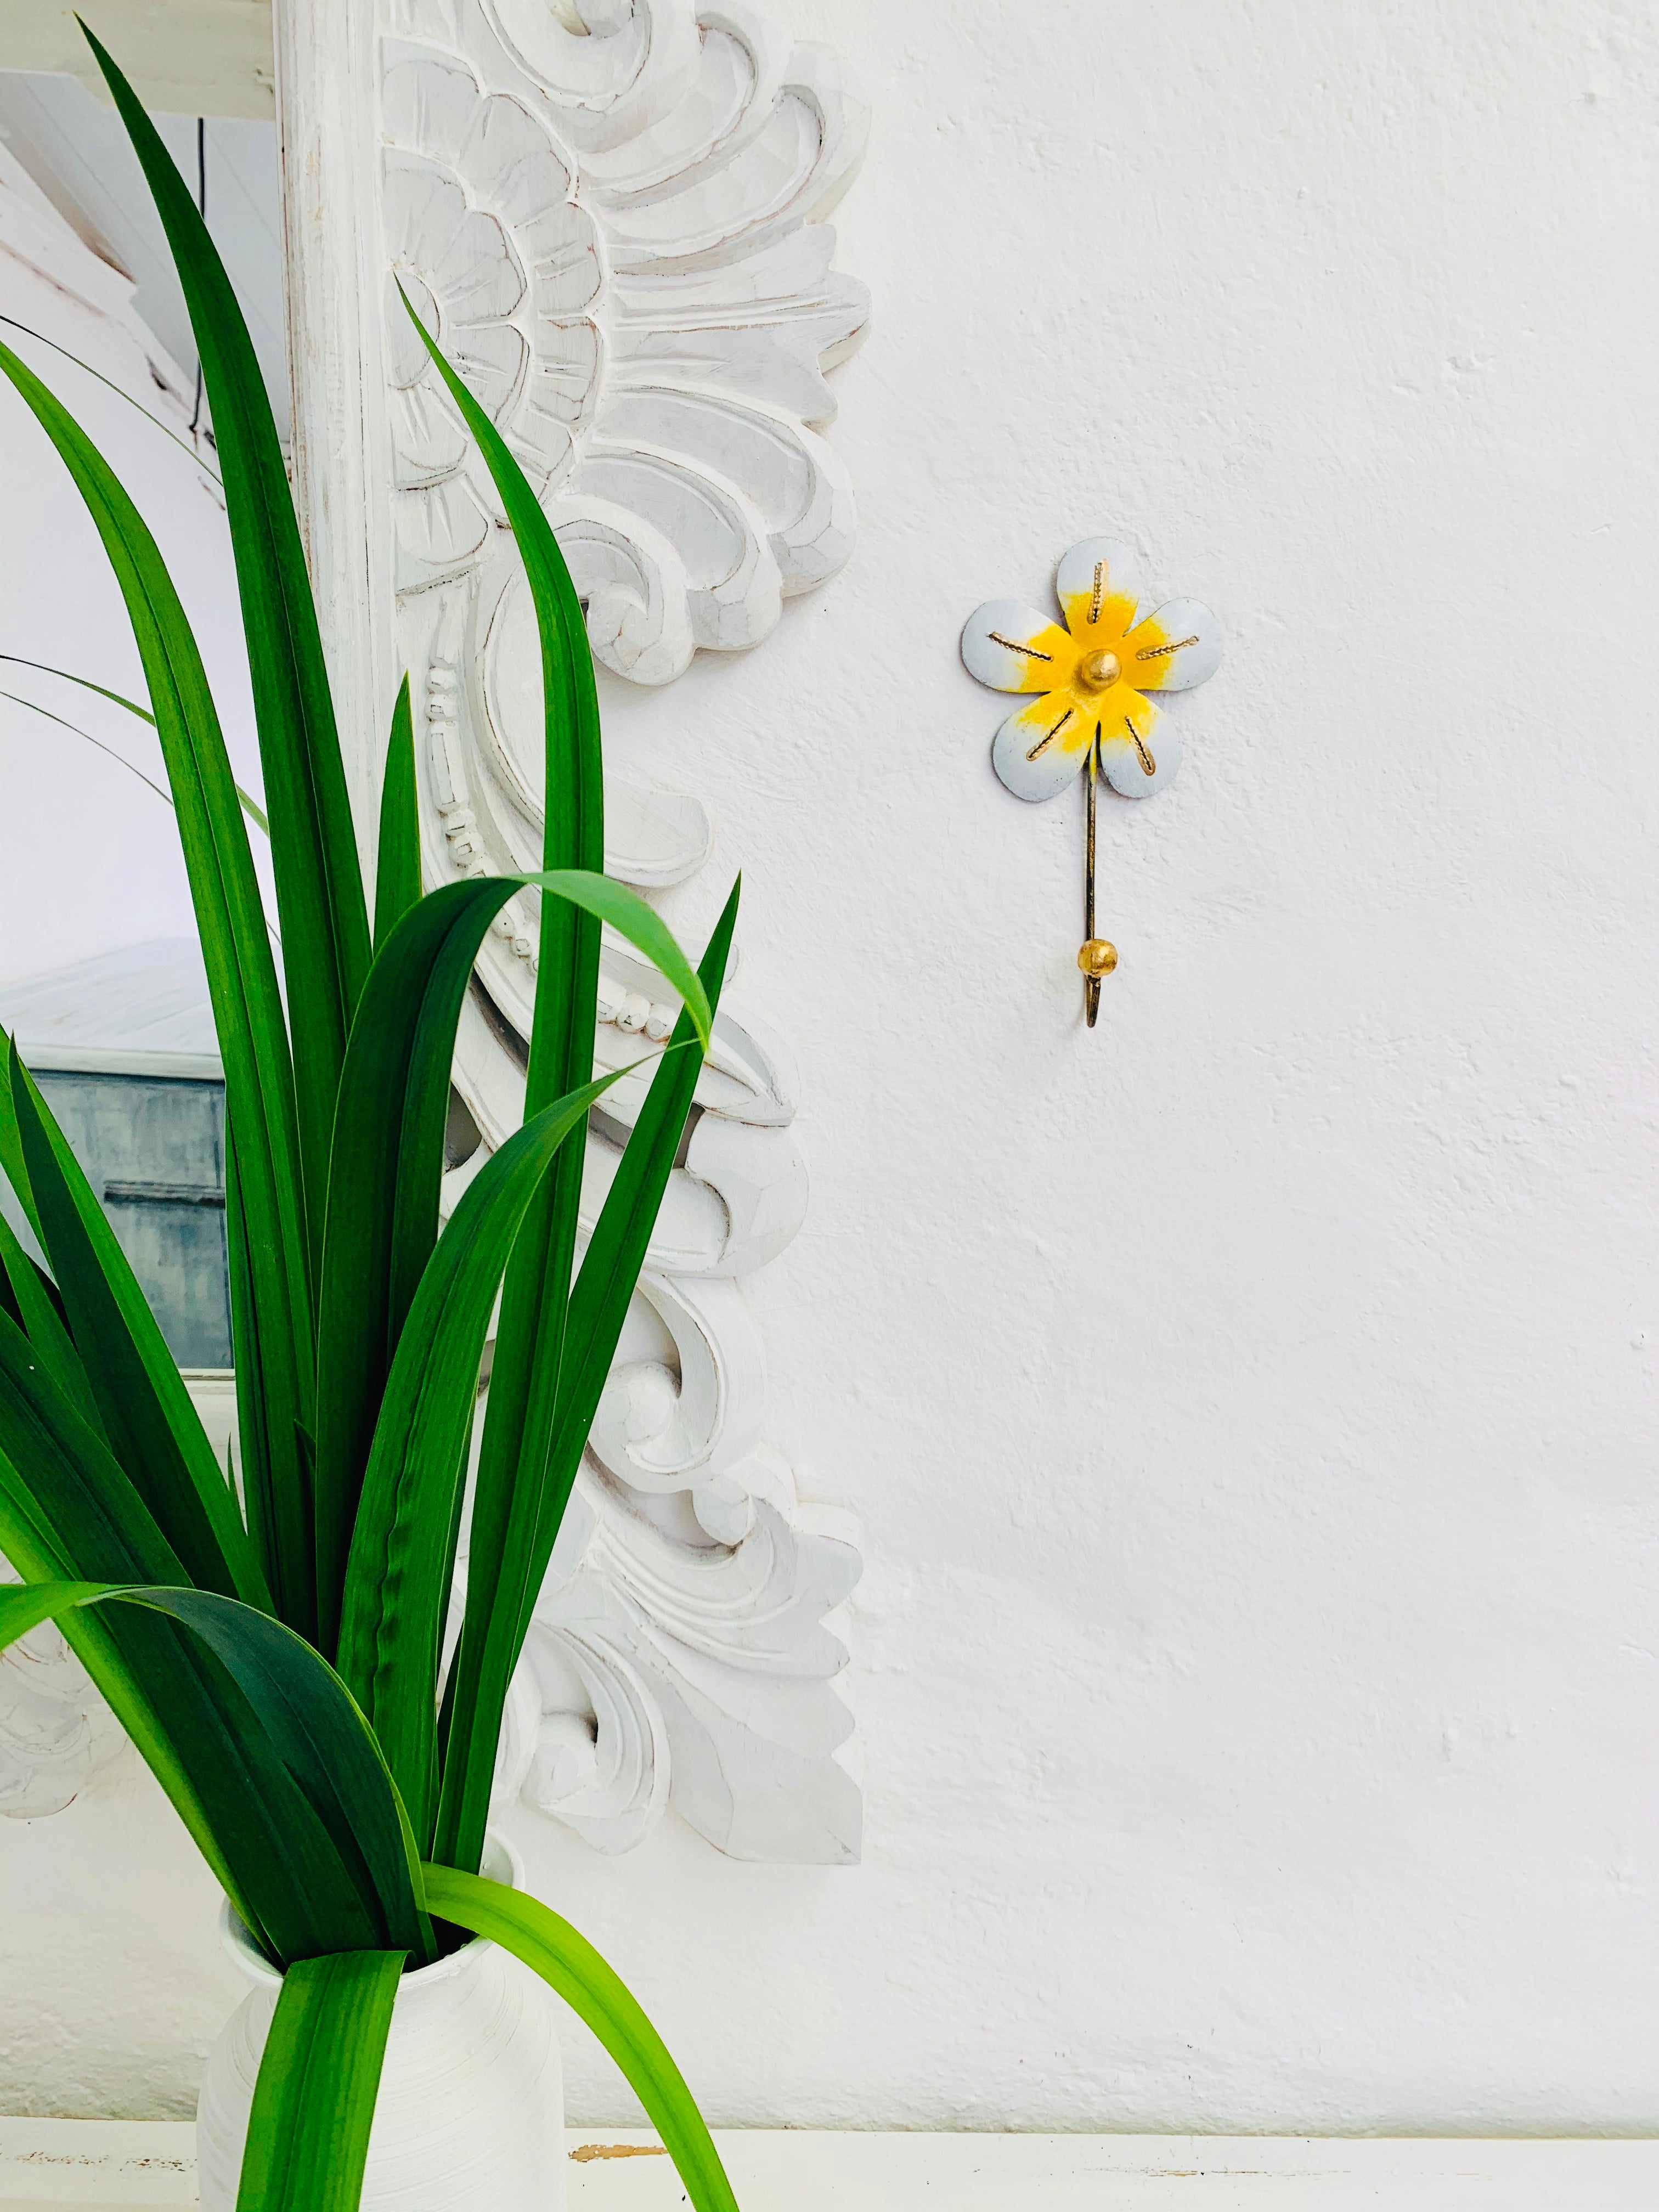 display view og daisy flower hook attached to the wall with a green plant by for decoration